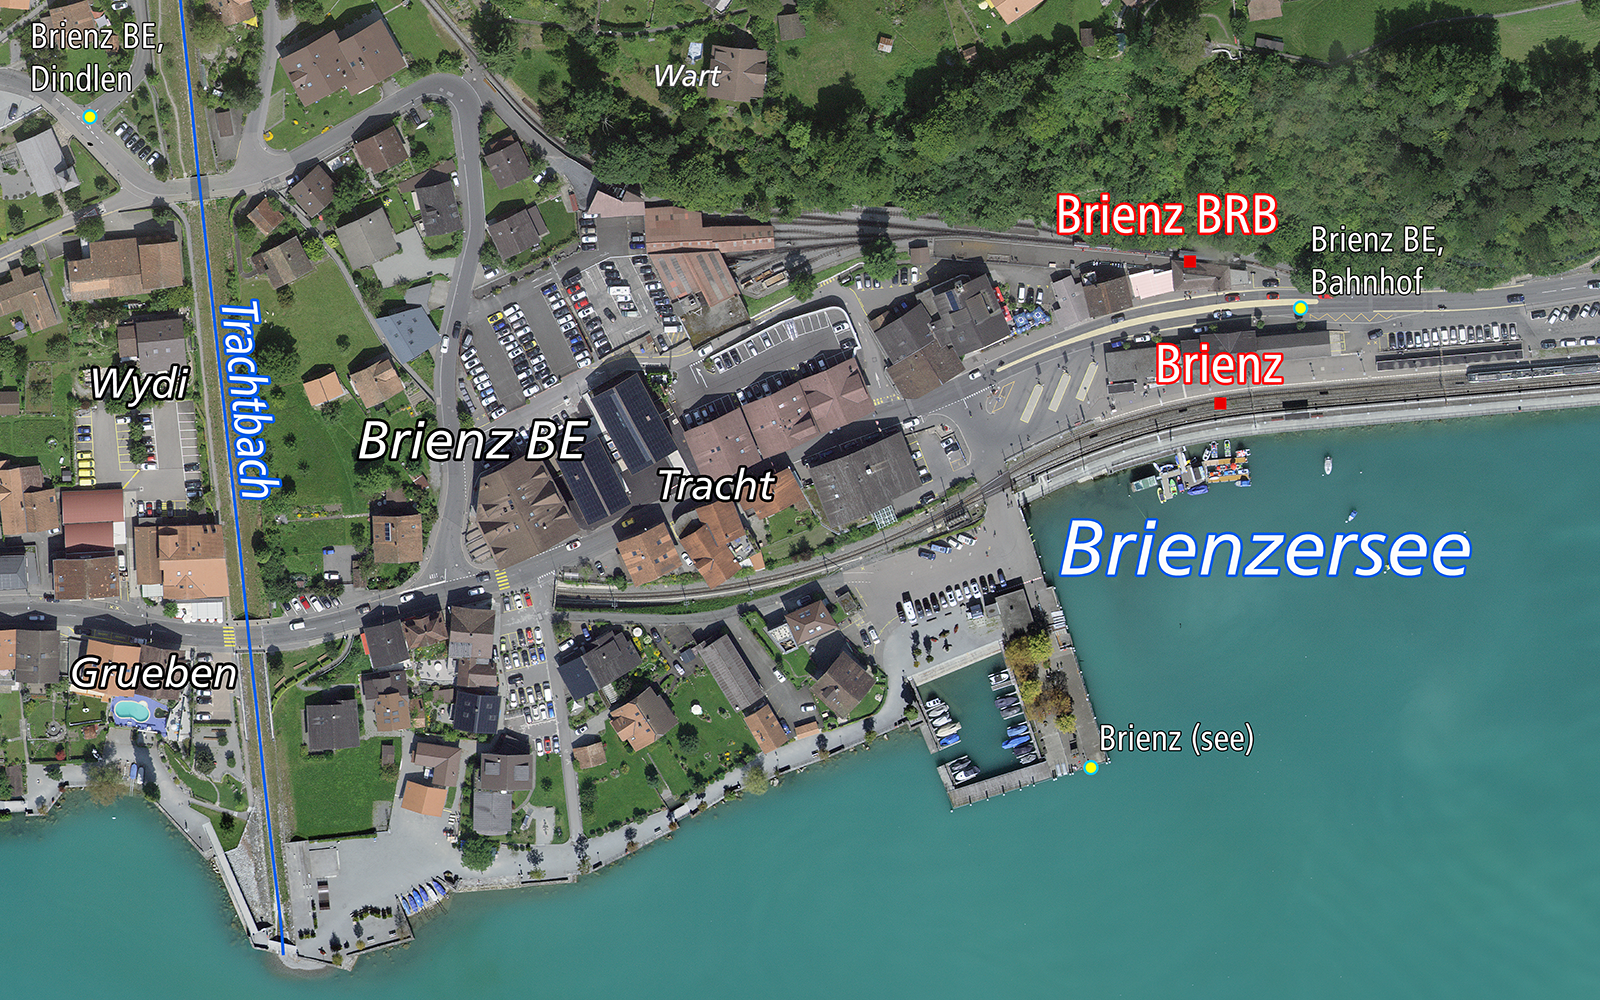 The picture shows an aerial view of Brienz BE with the village, the railway station and Lake Brienz. 